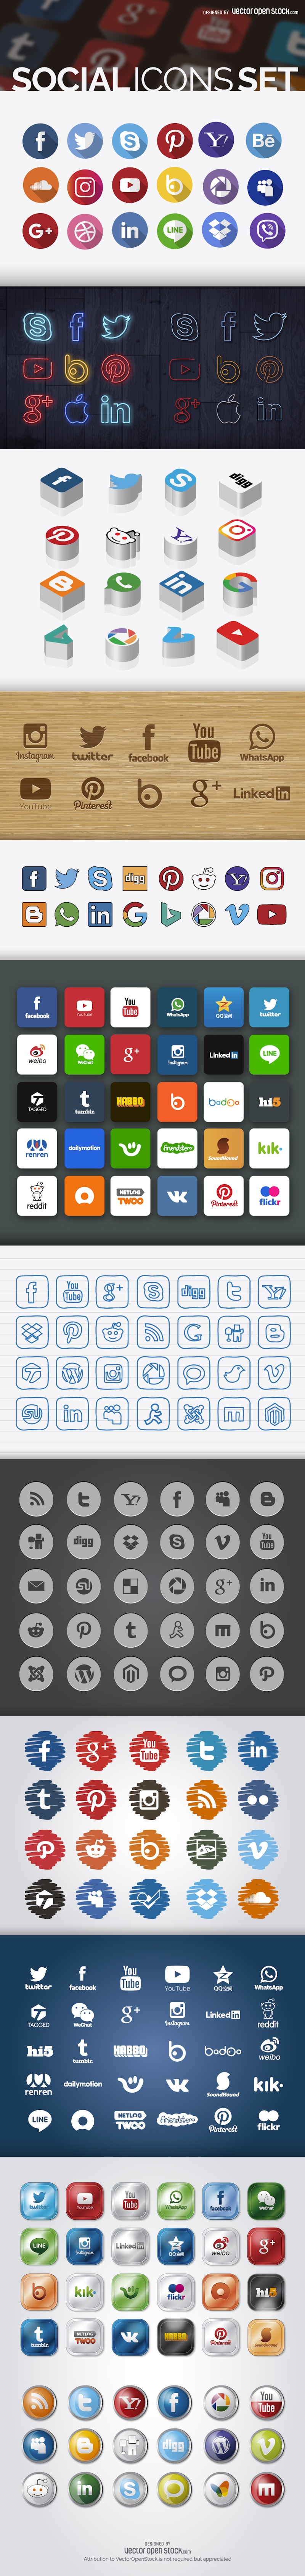 260 Free Social Icons Set In Different Styles preview